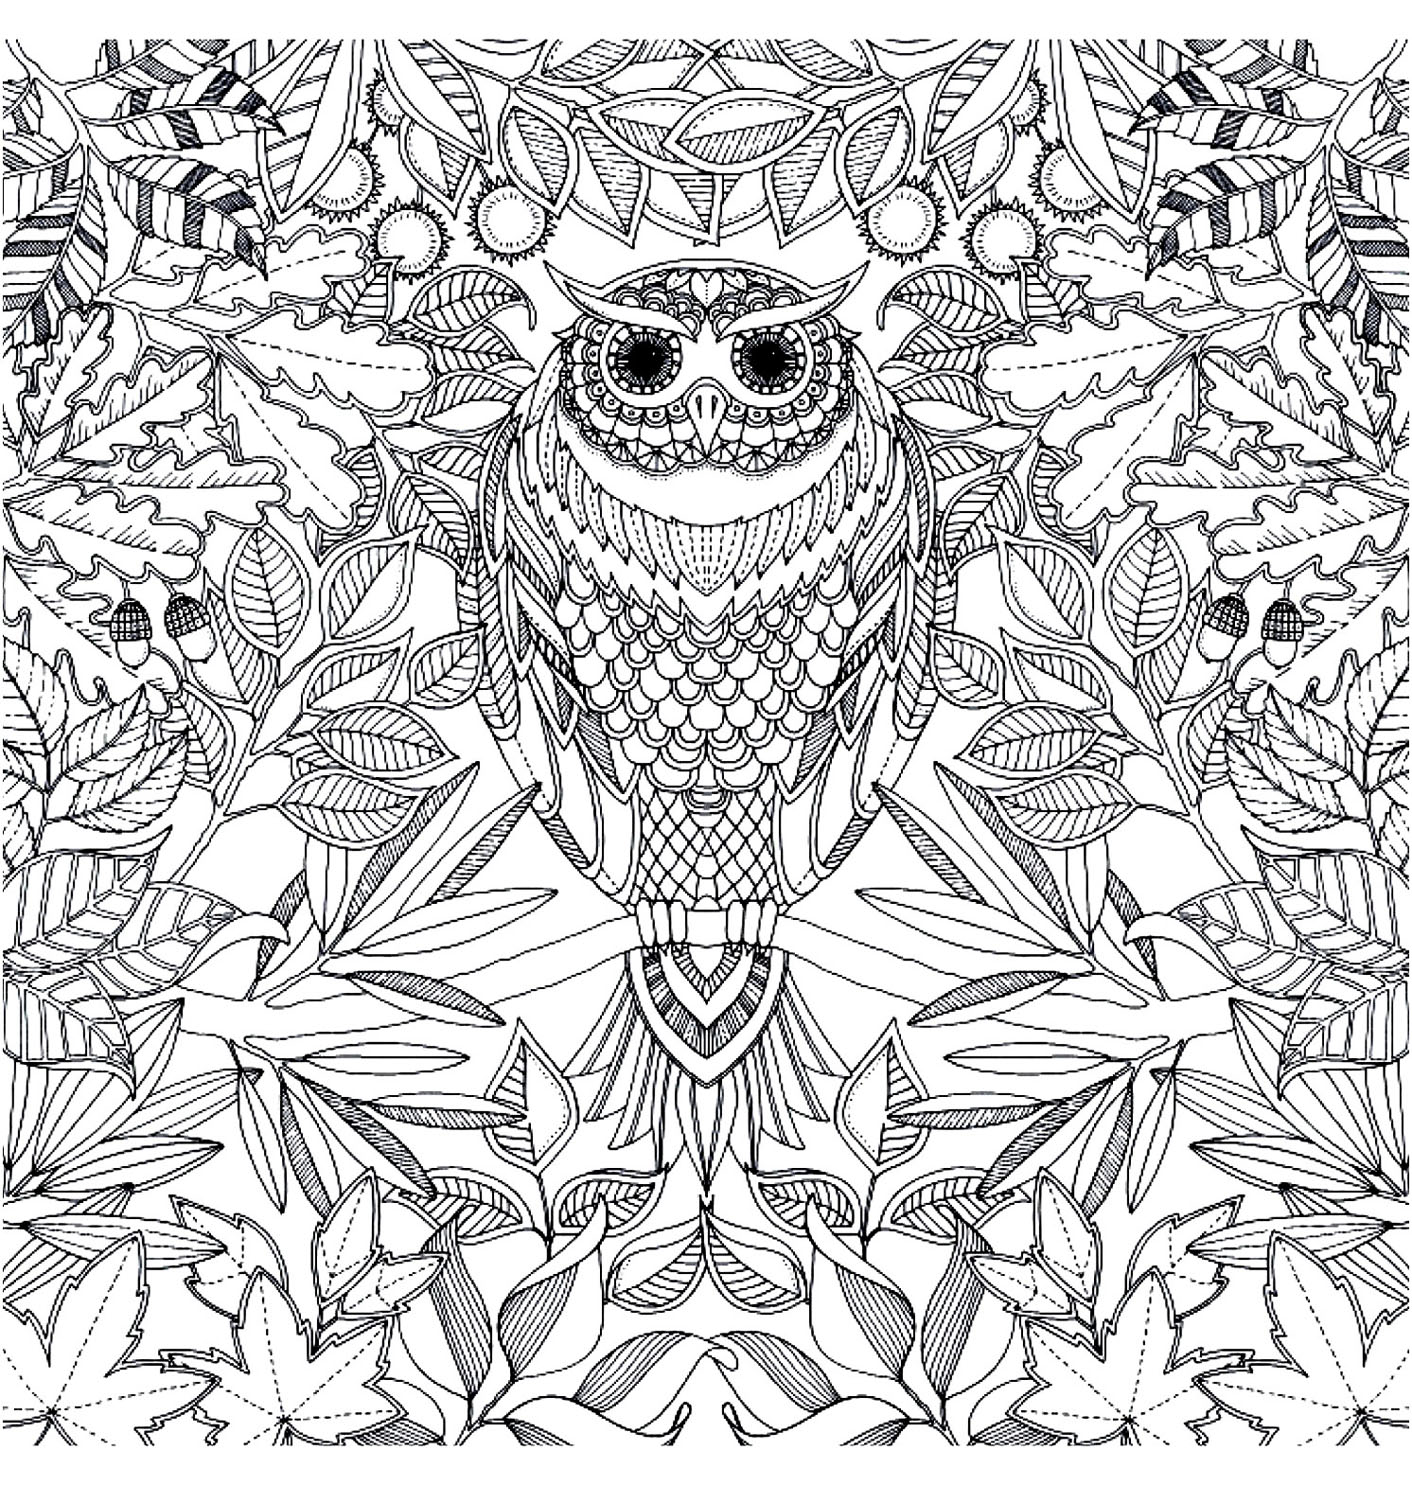 Coloring Adult Hibou Owl With Piercing Look To